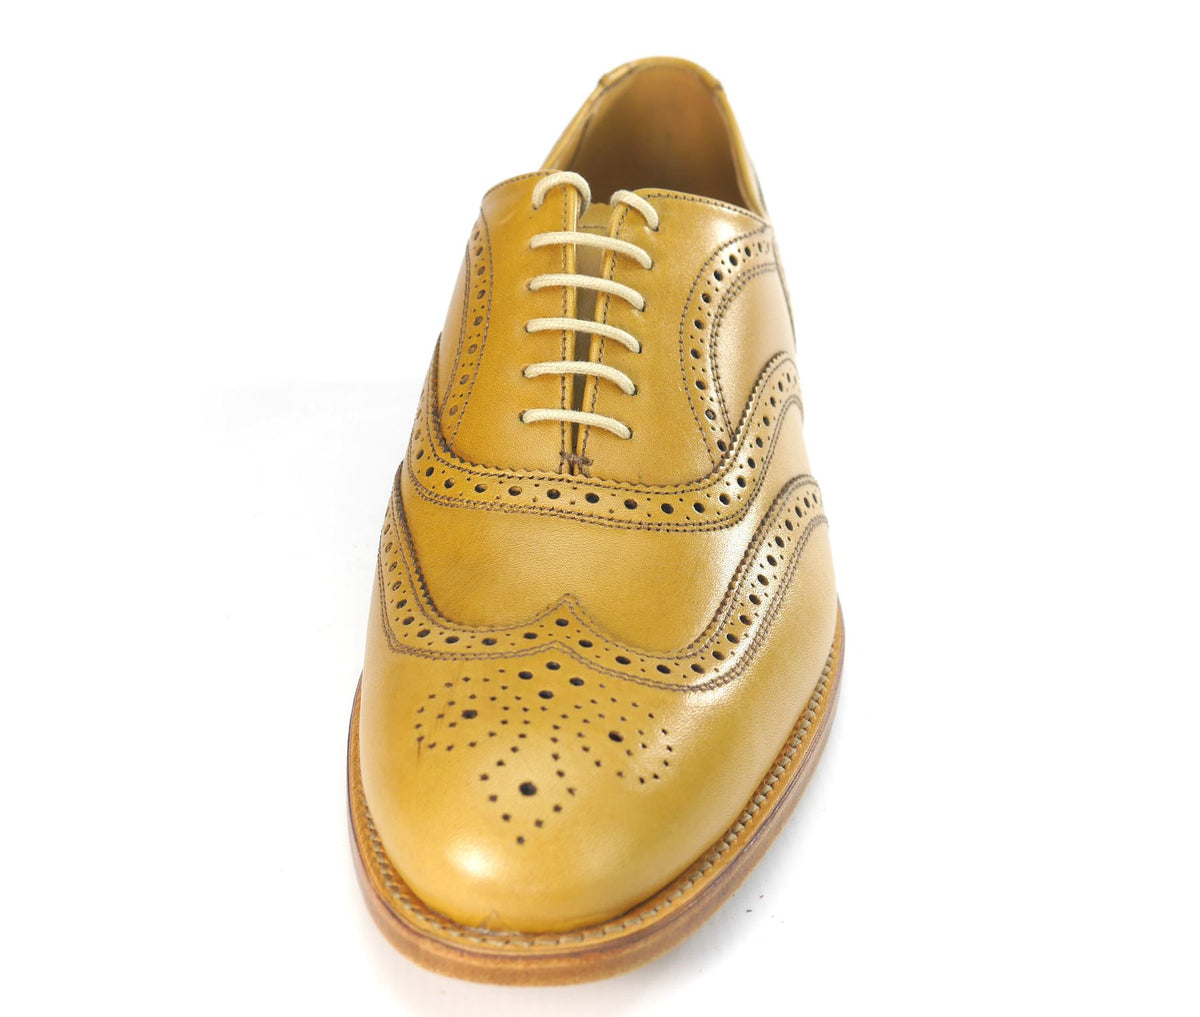 Charles Horrel England CH2006 Welted Cambridge Wingtip Tan Brogue Shoes